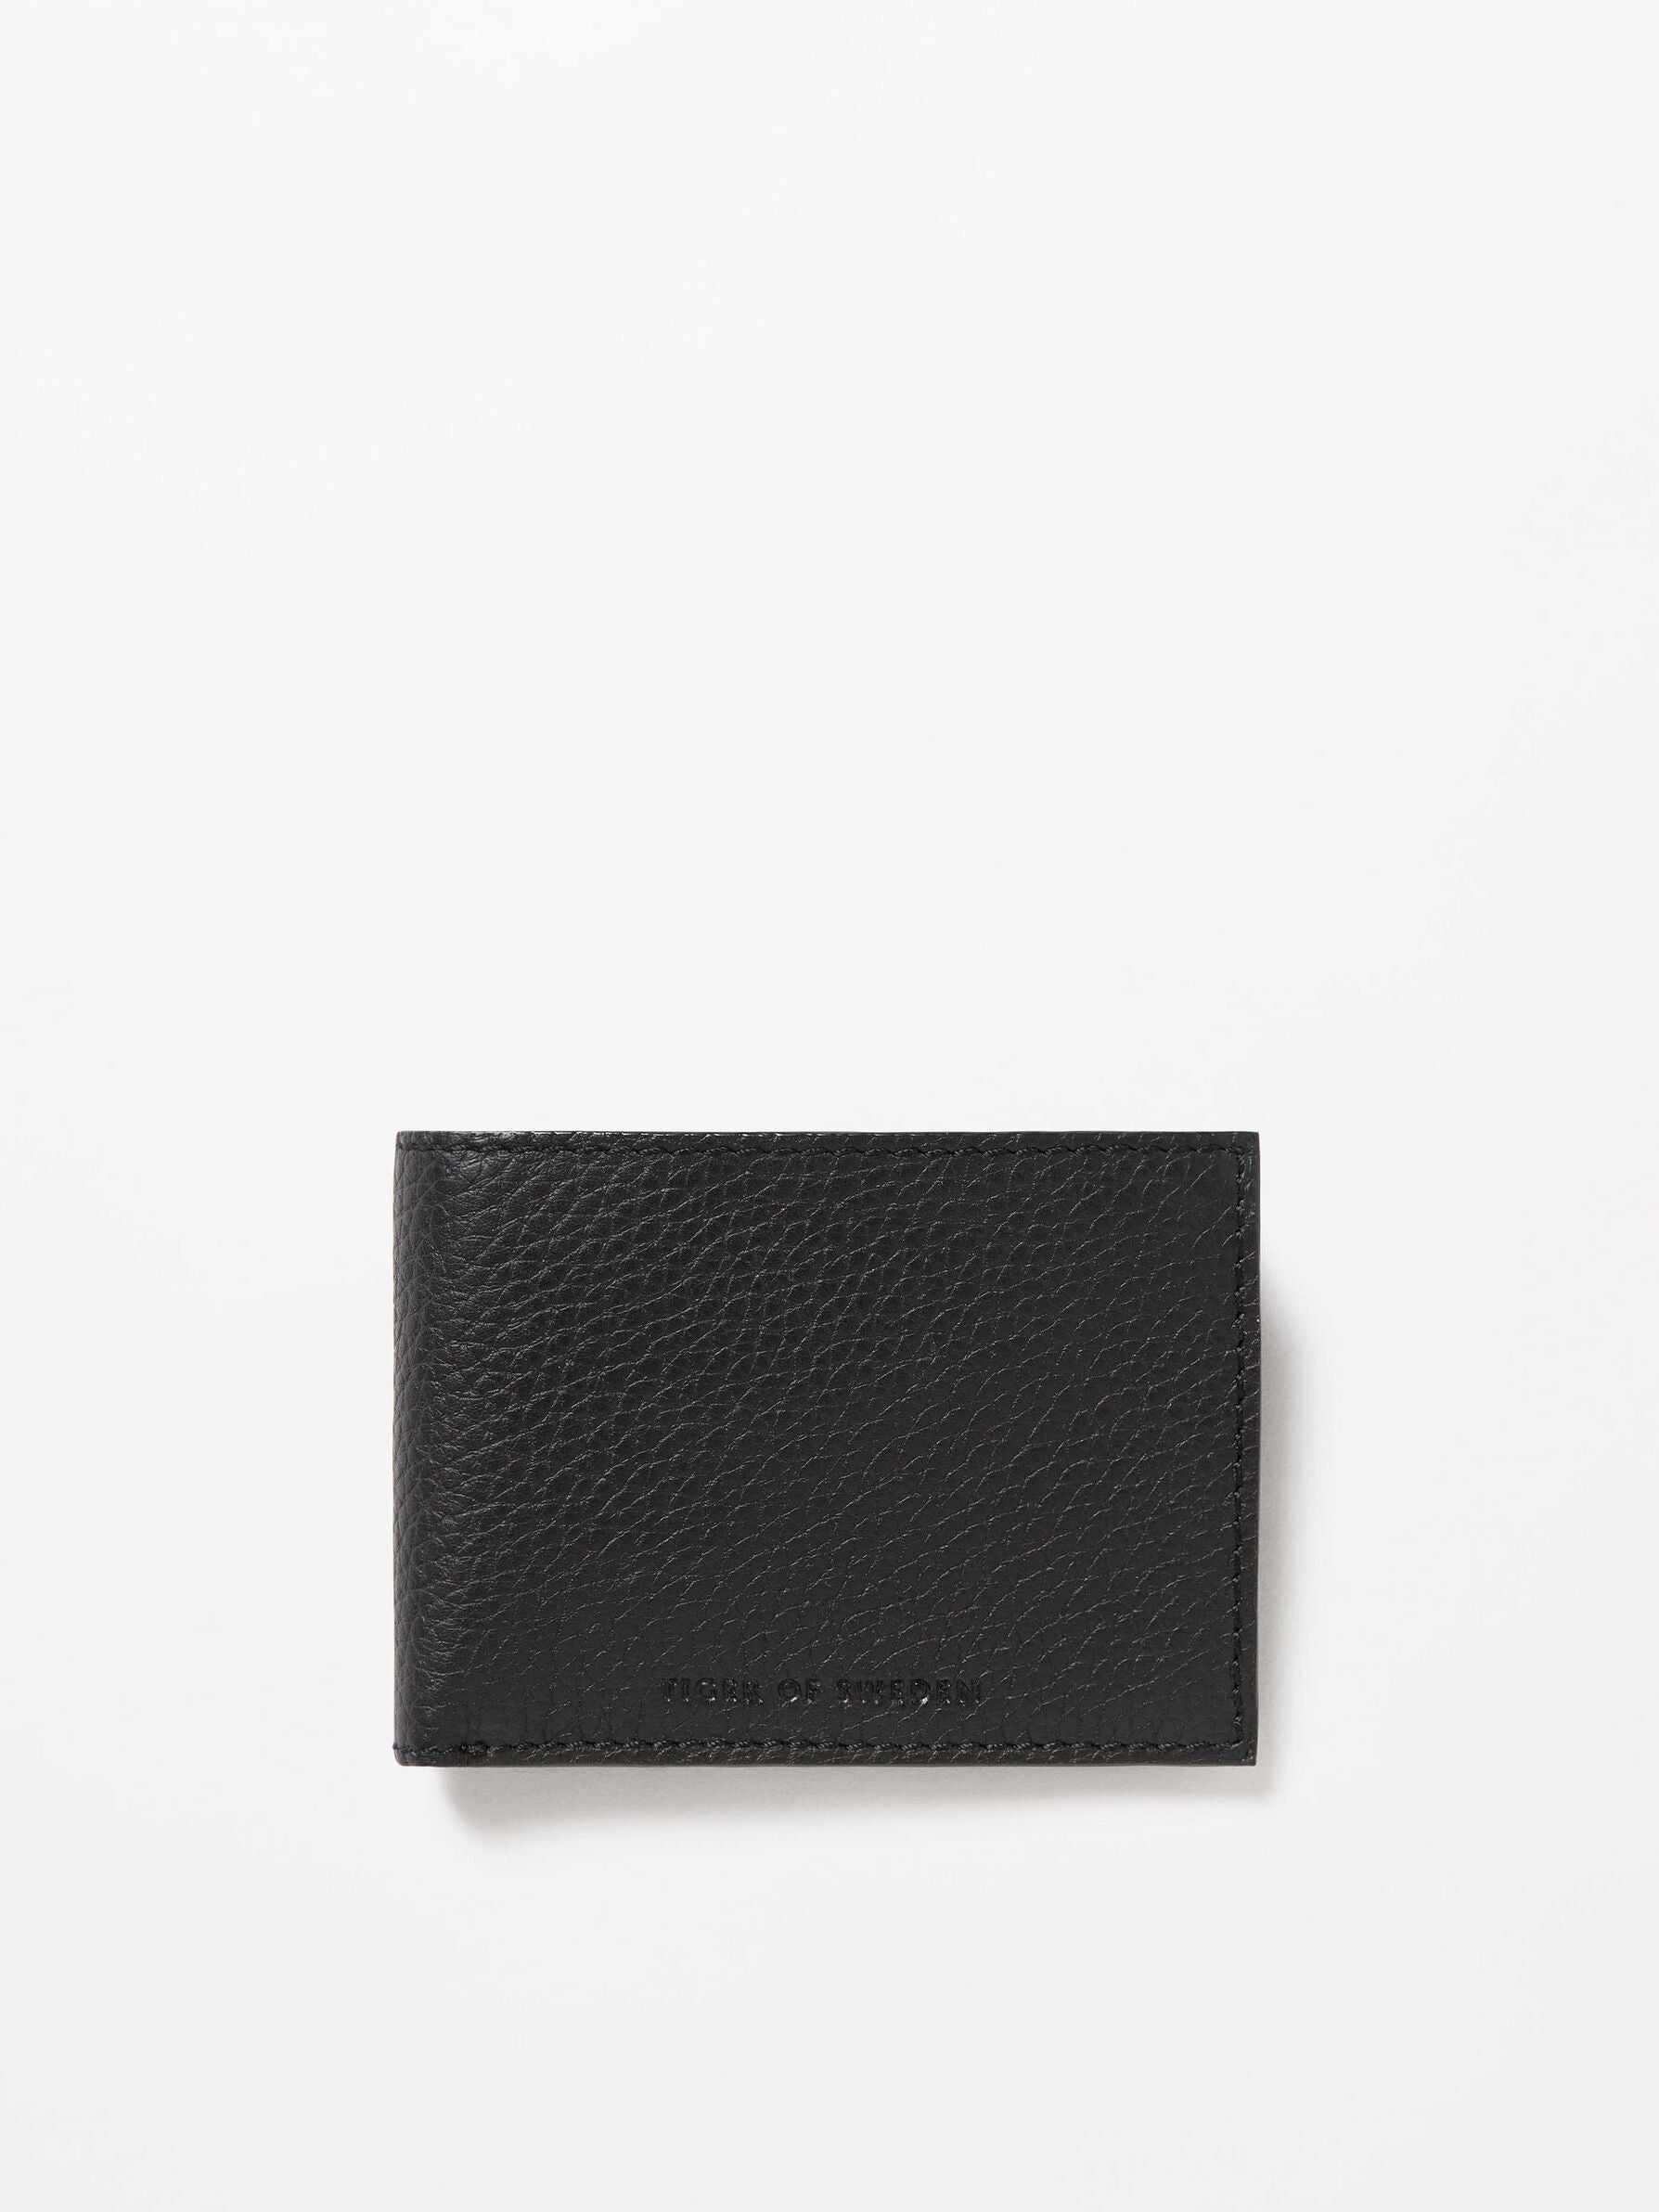 TIGER OF SWEDEN WALD WALLET IN BLACK U69380006Z 050 | Shop from eightywingold an official brand partner for TIGER OF SWEDEN CANADA & US